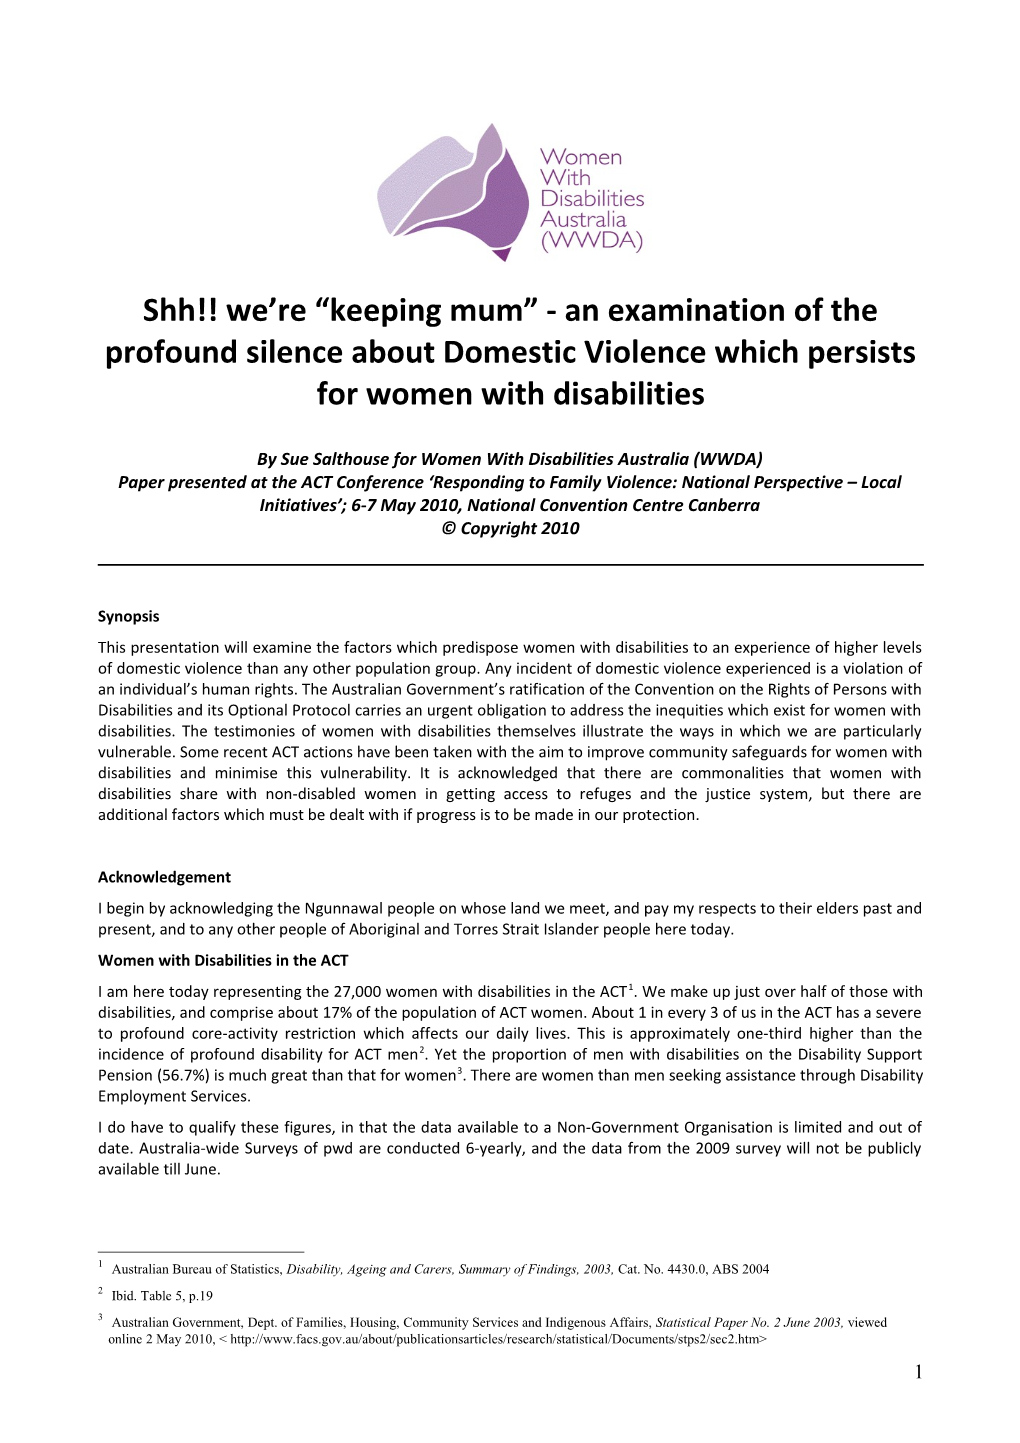 By Sue Salthouse for Women with Disabilities Australia (WWDA)